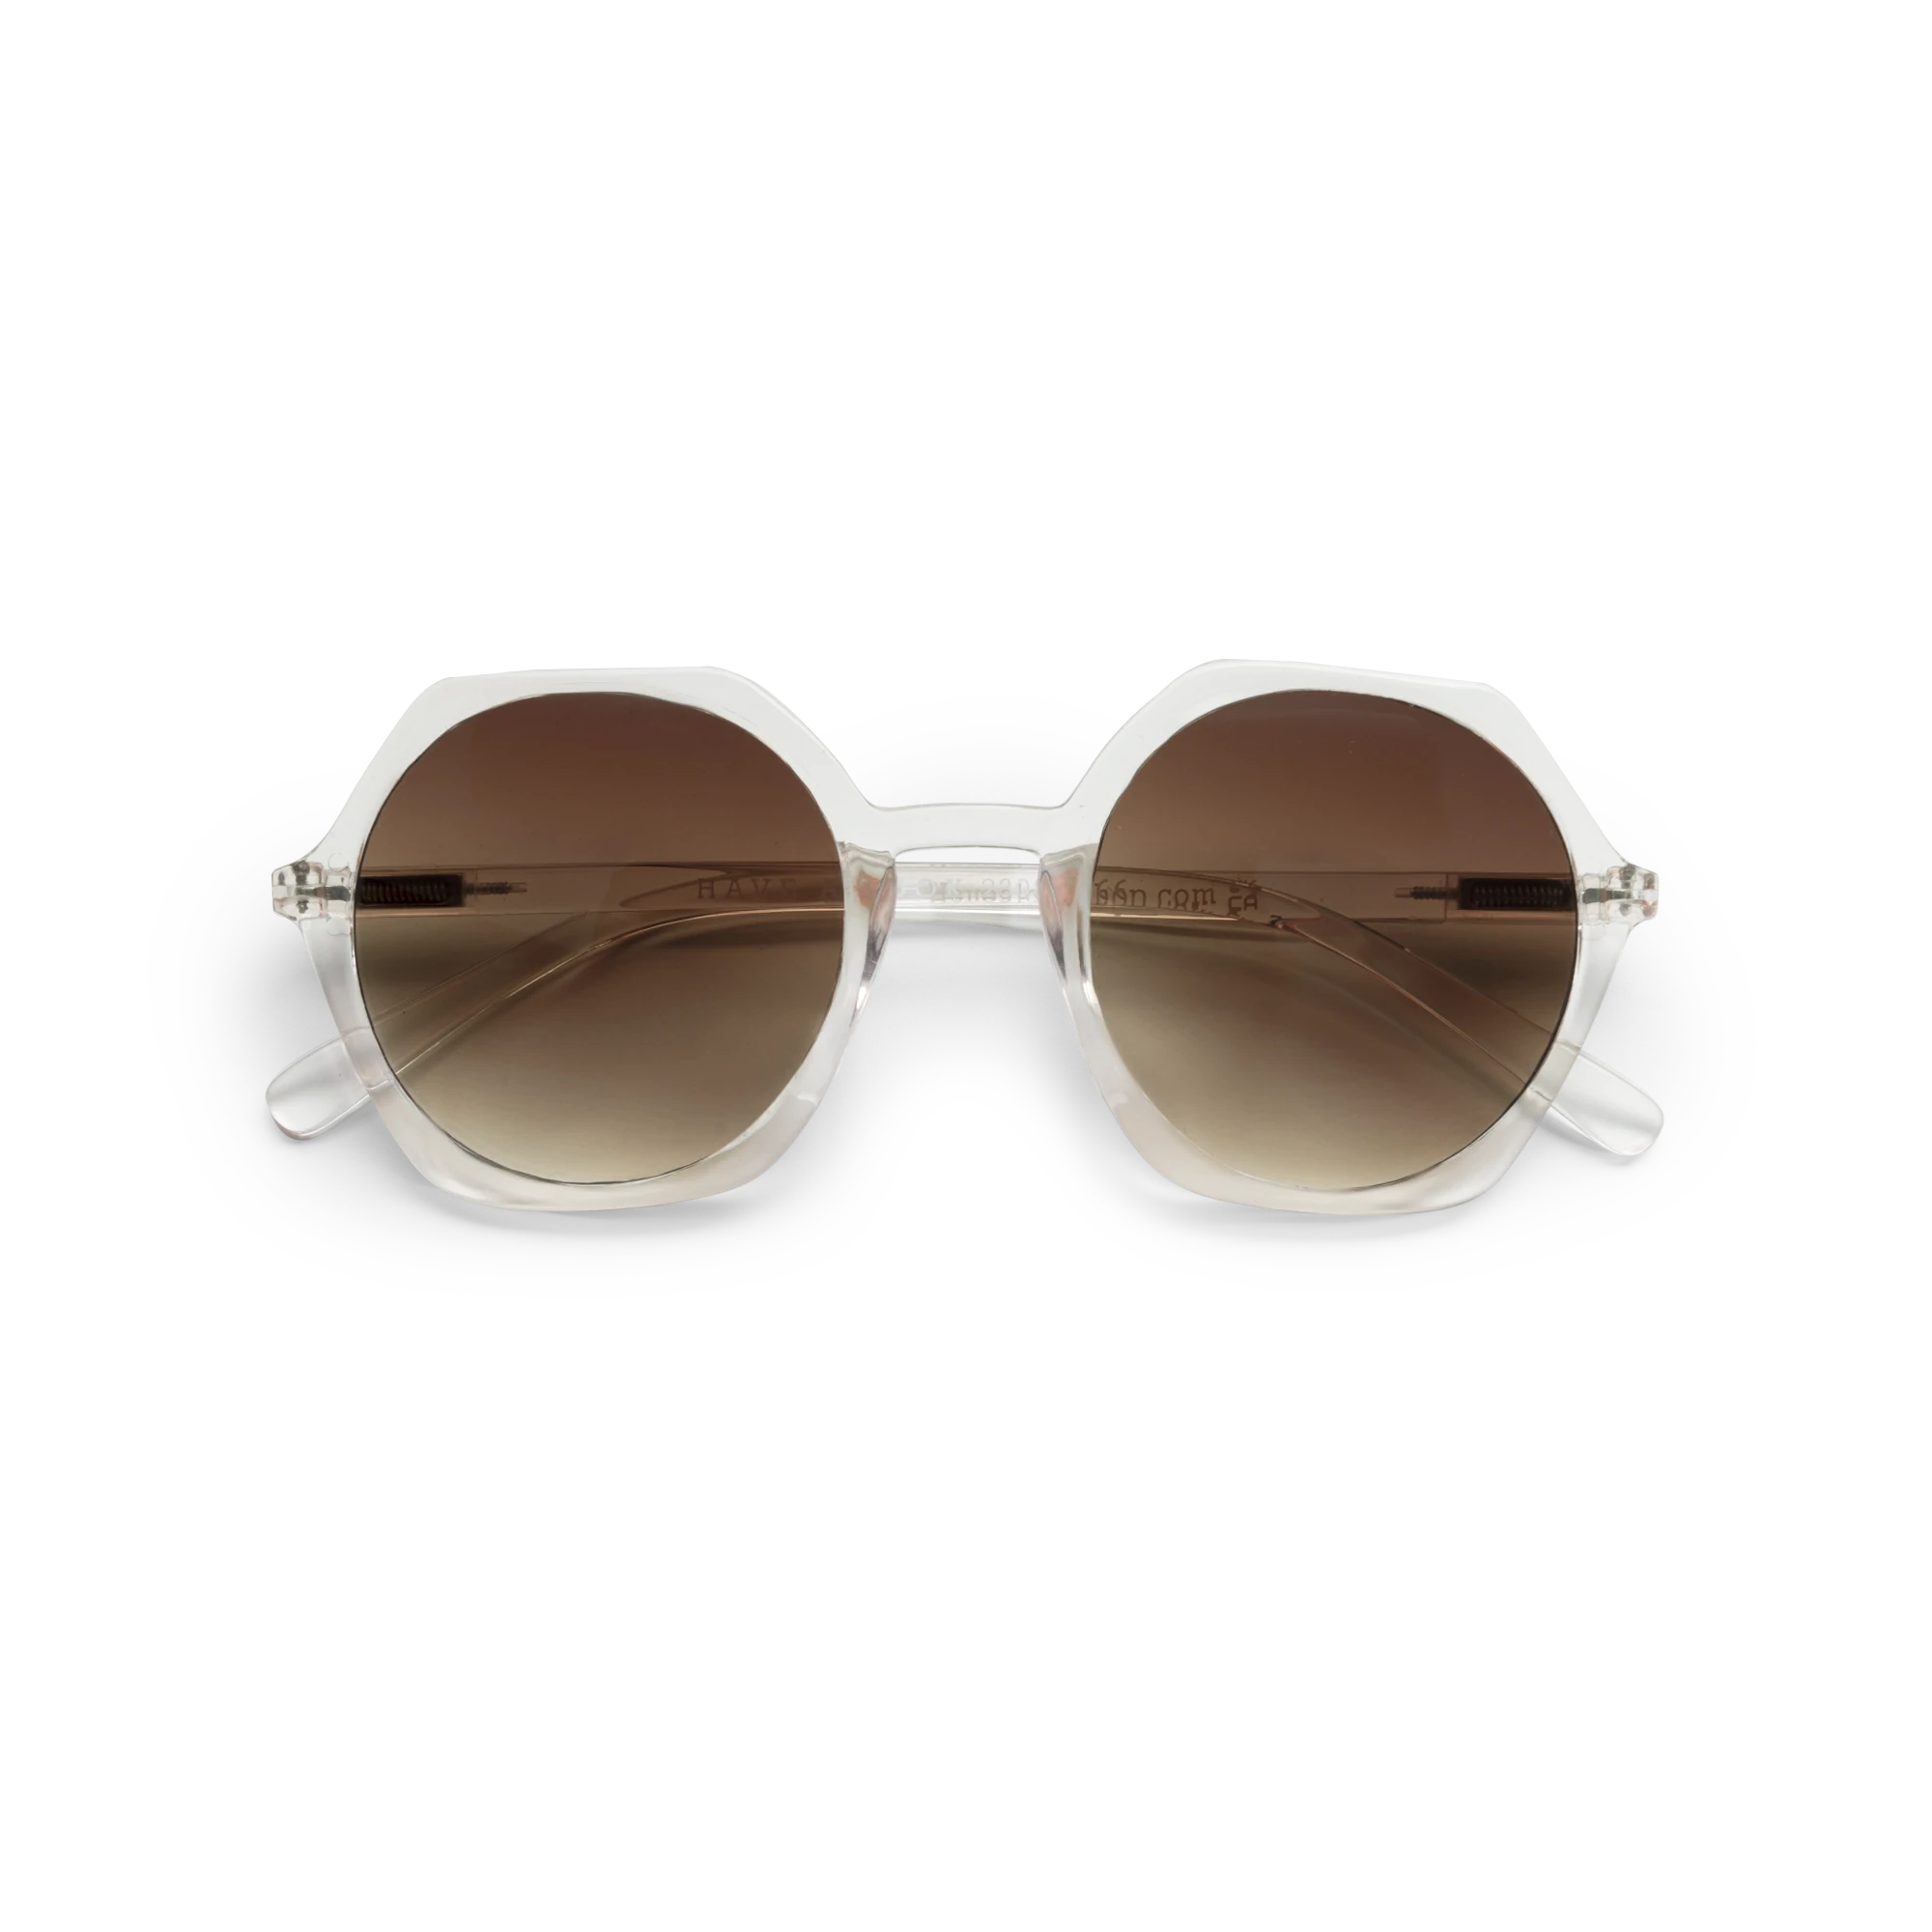 Edgy Sunglasses - 100% UV Protection by Have A Look